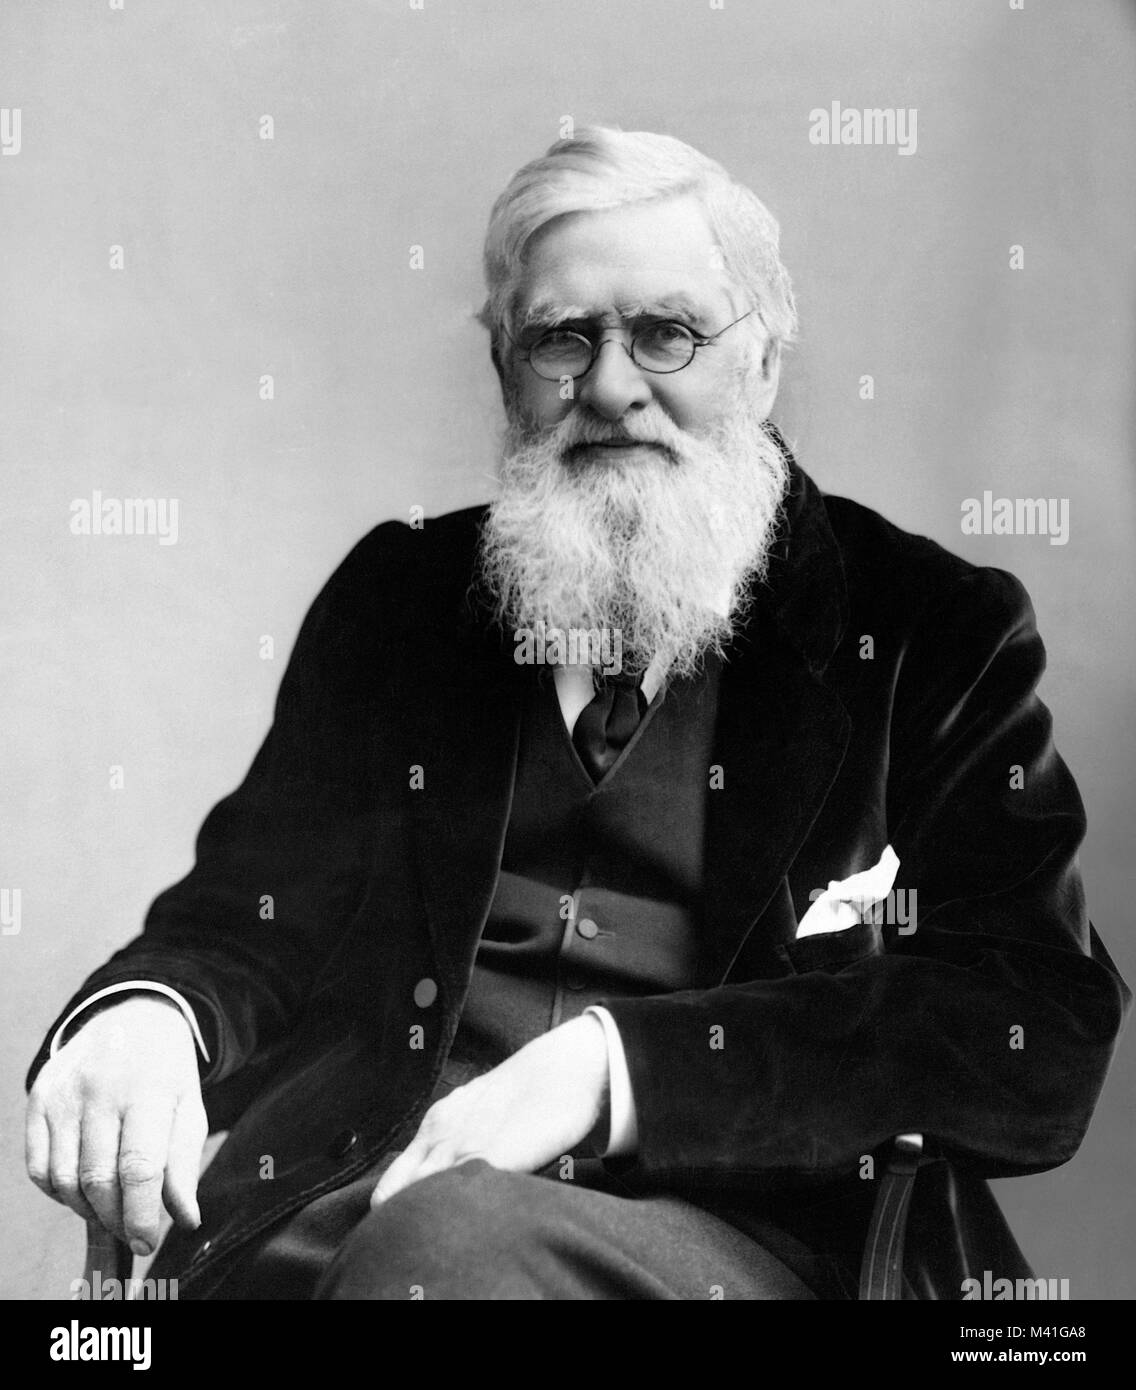 Alfred Wallace. Ritratto del naturalista inglese Alfred Russel Wallace (1823-1913) Foto Stock